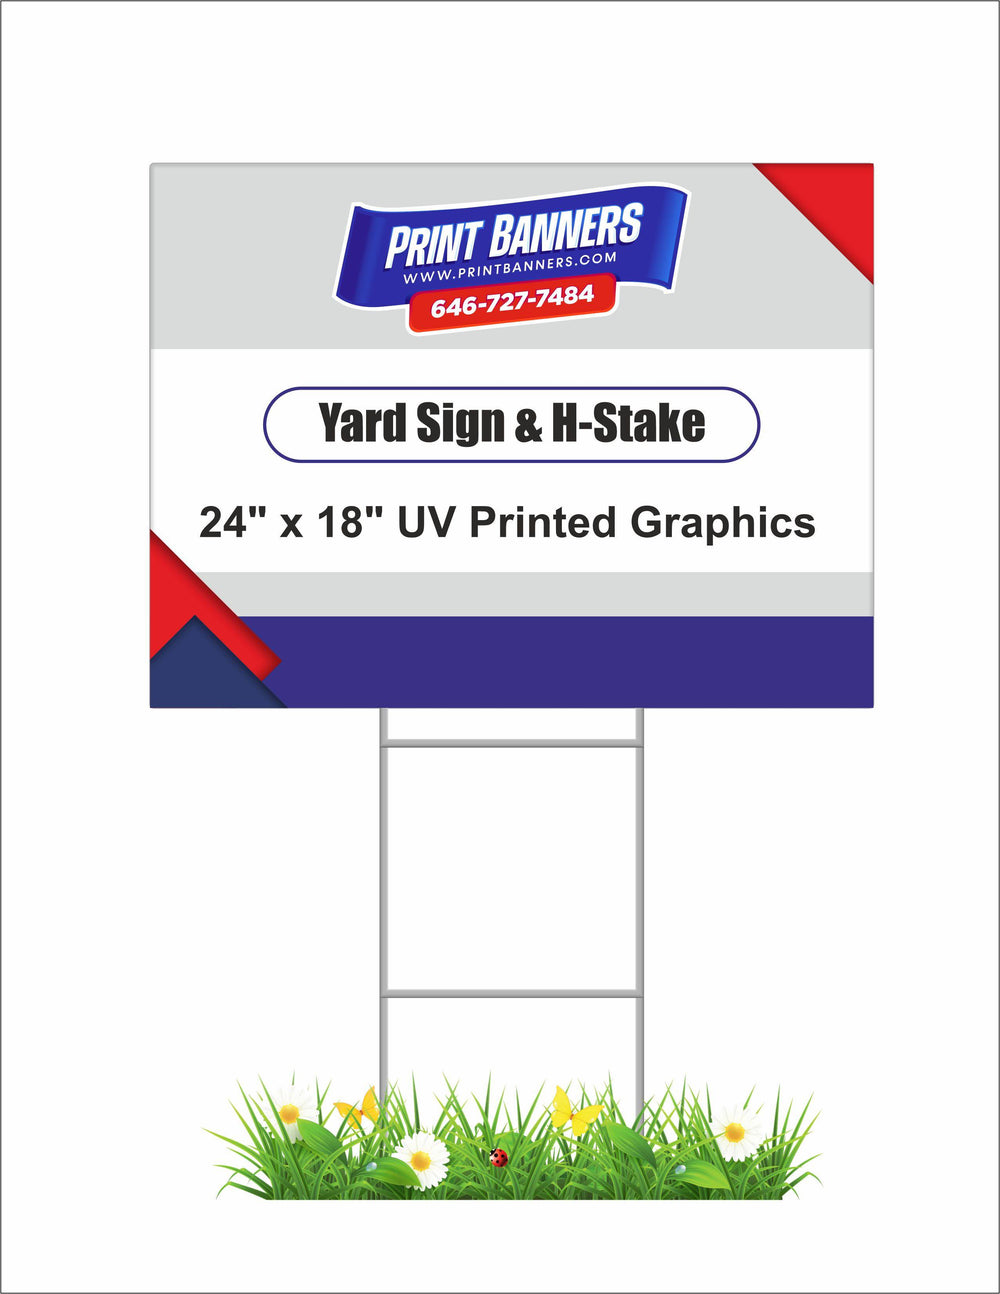 Economy Yard Signs (4mm Corrugated Plastic) - Print Banners NYC